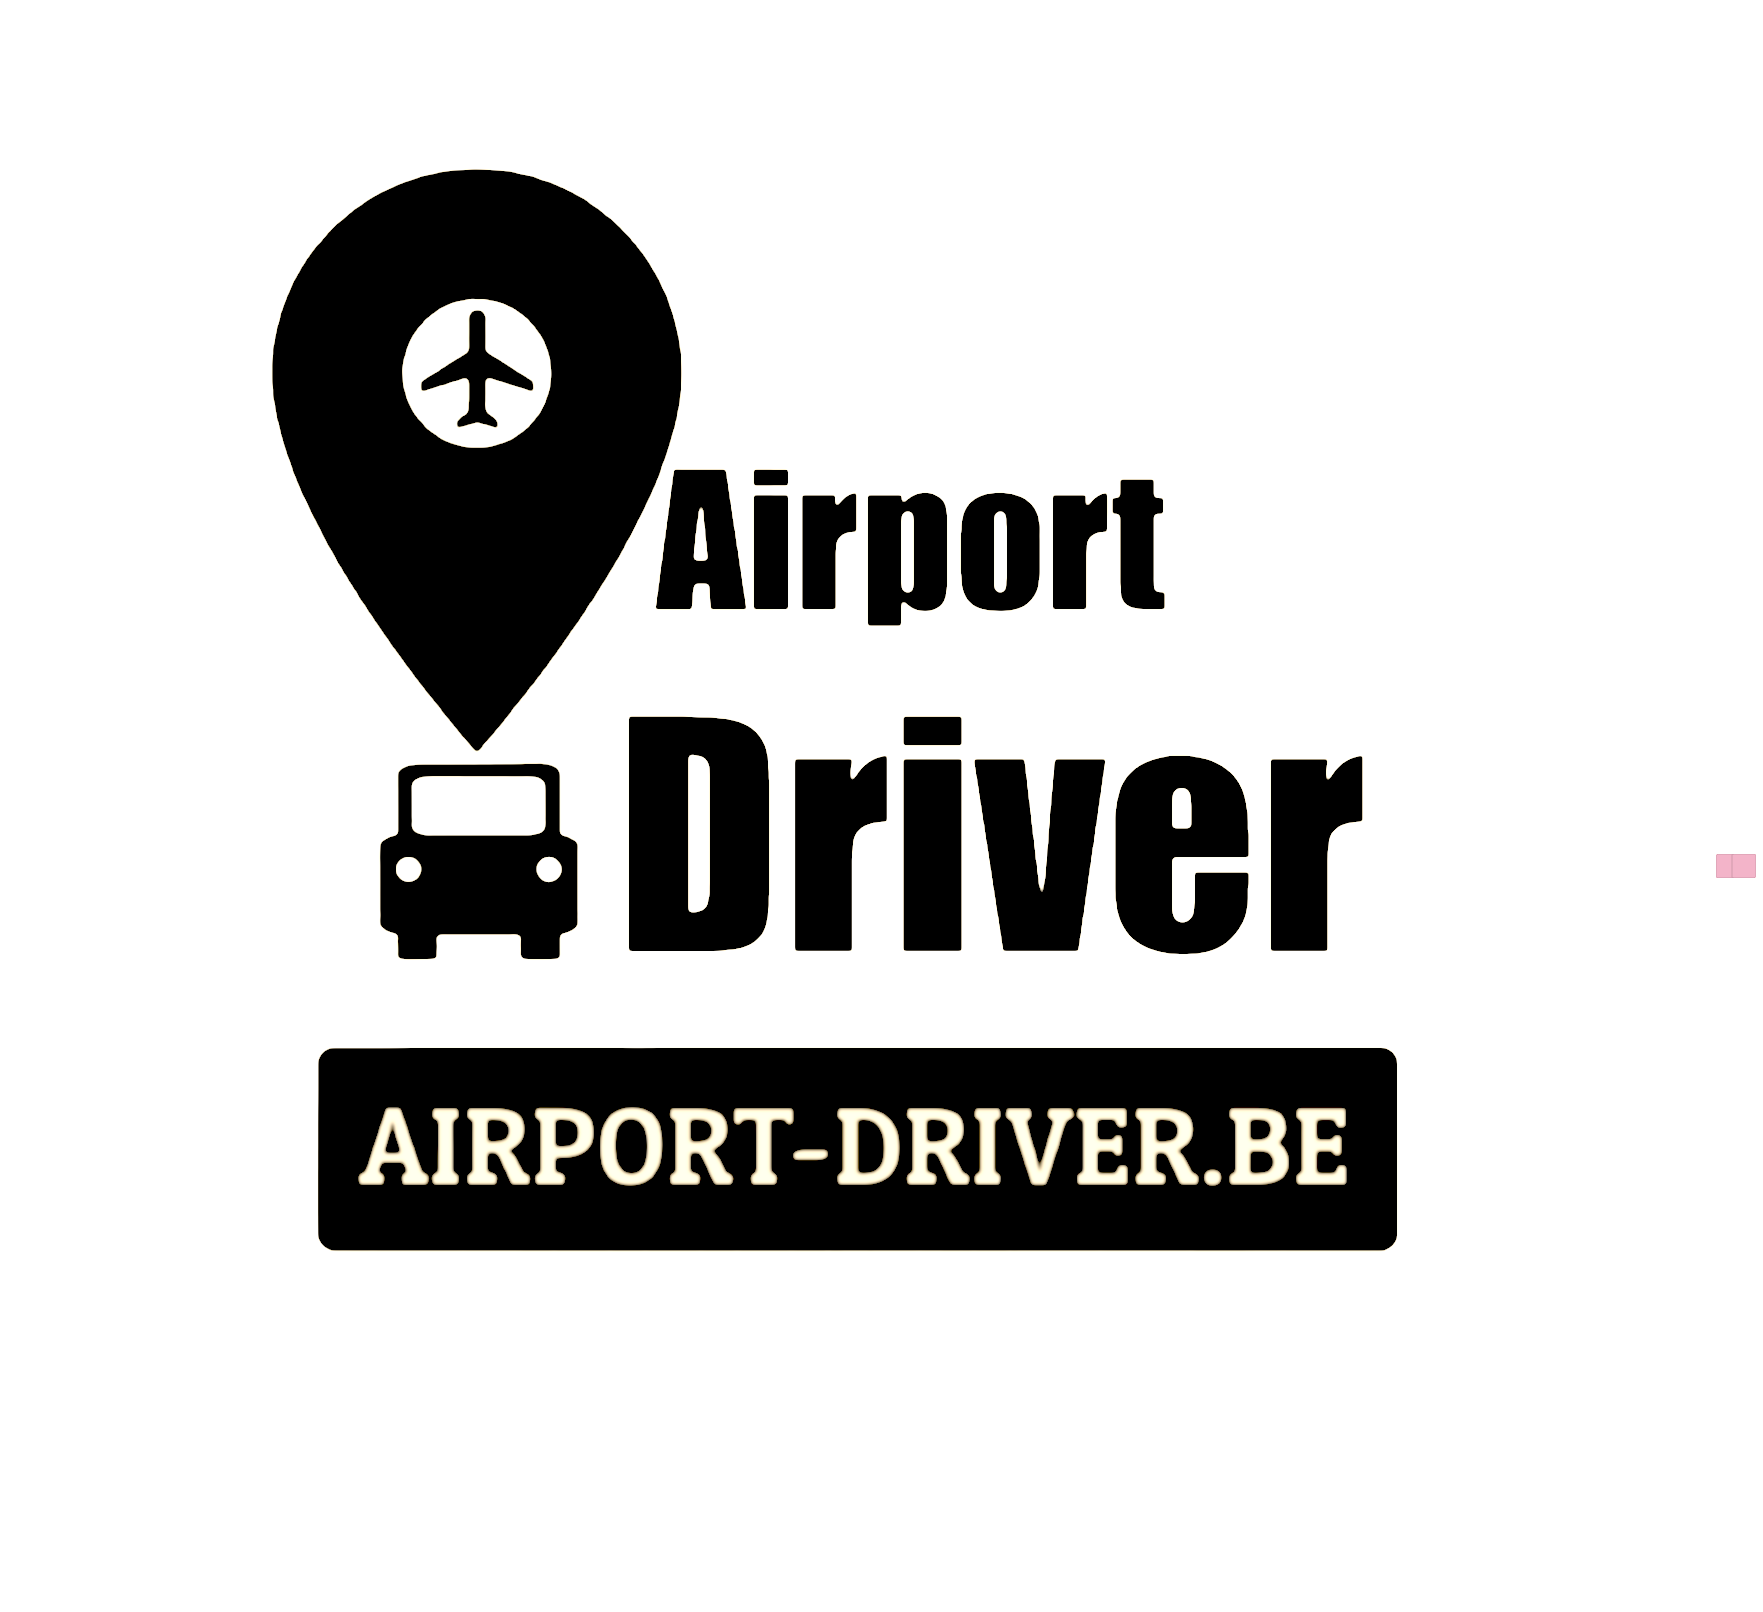 www.airport-driver.be